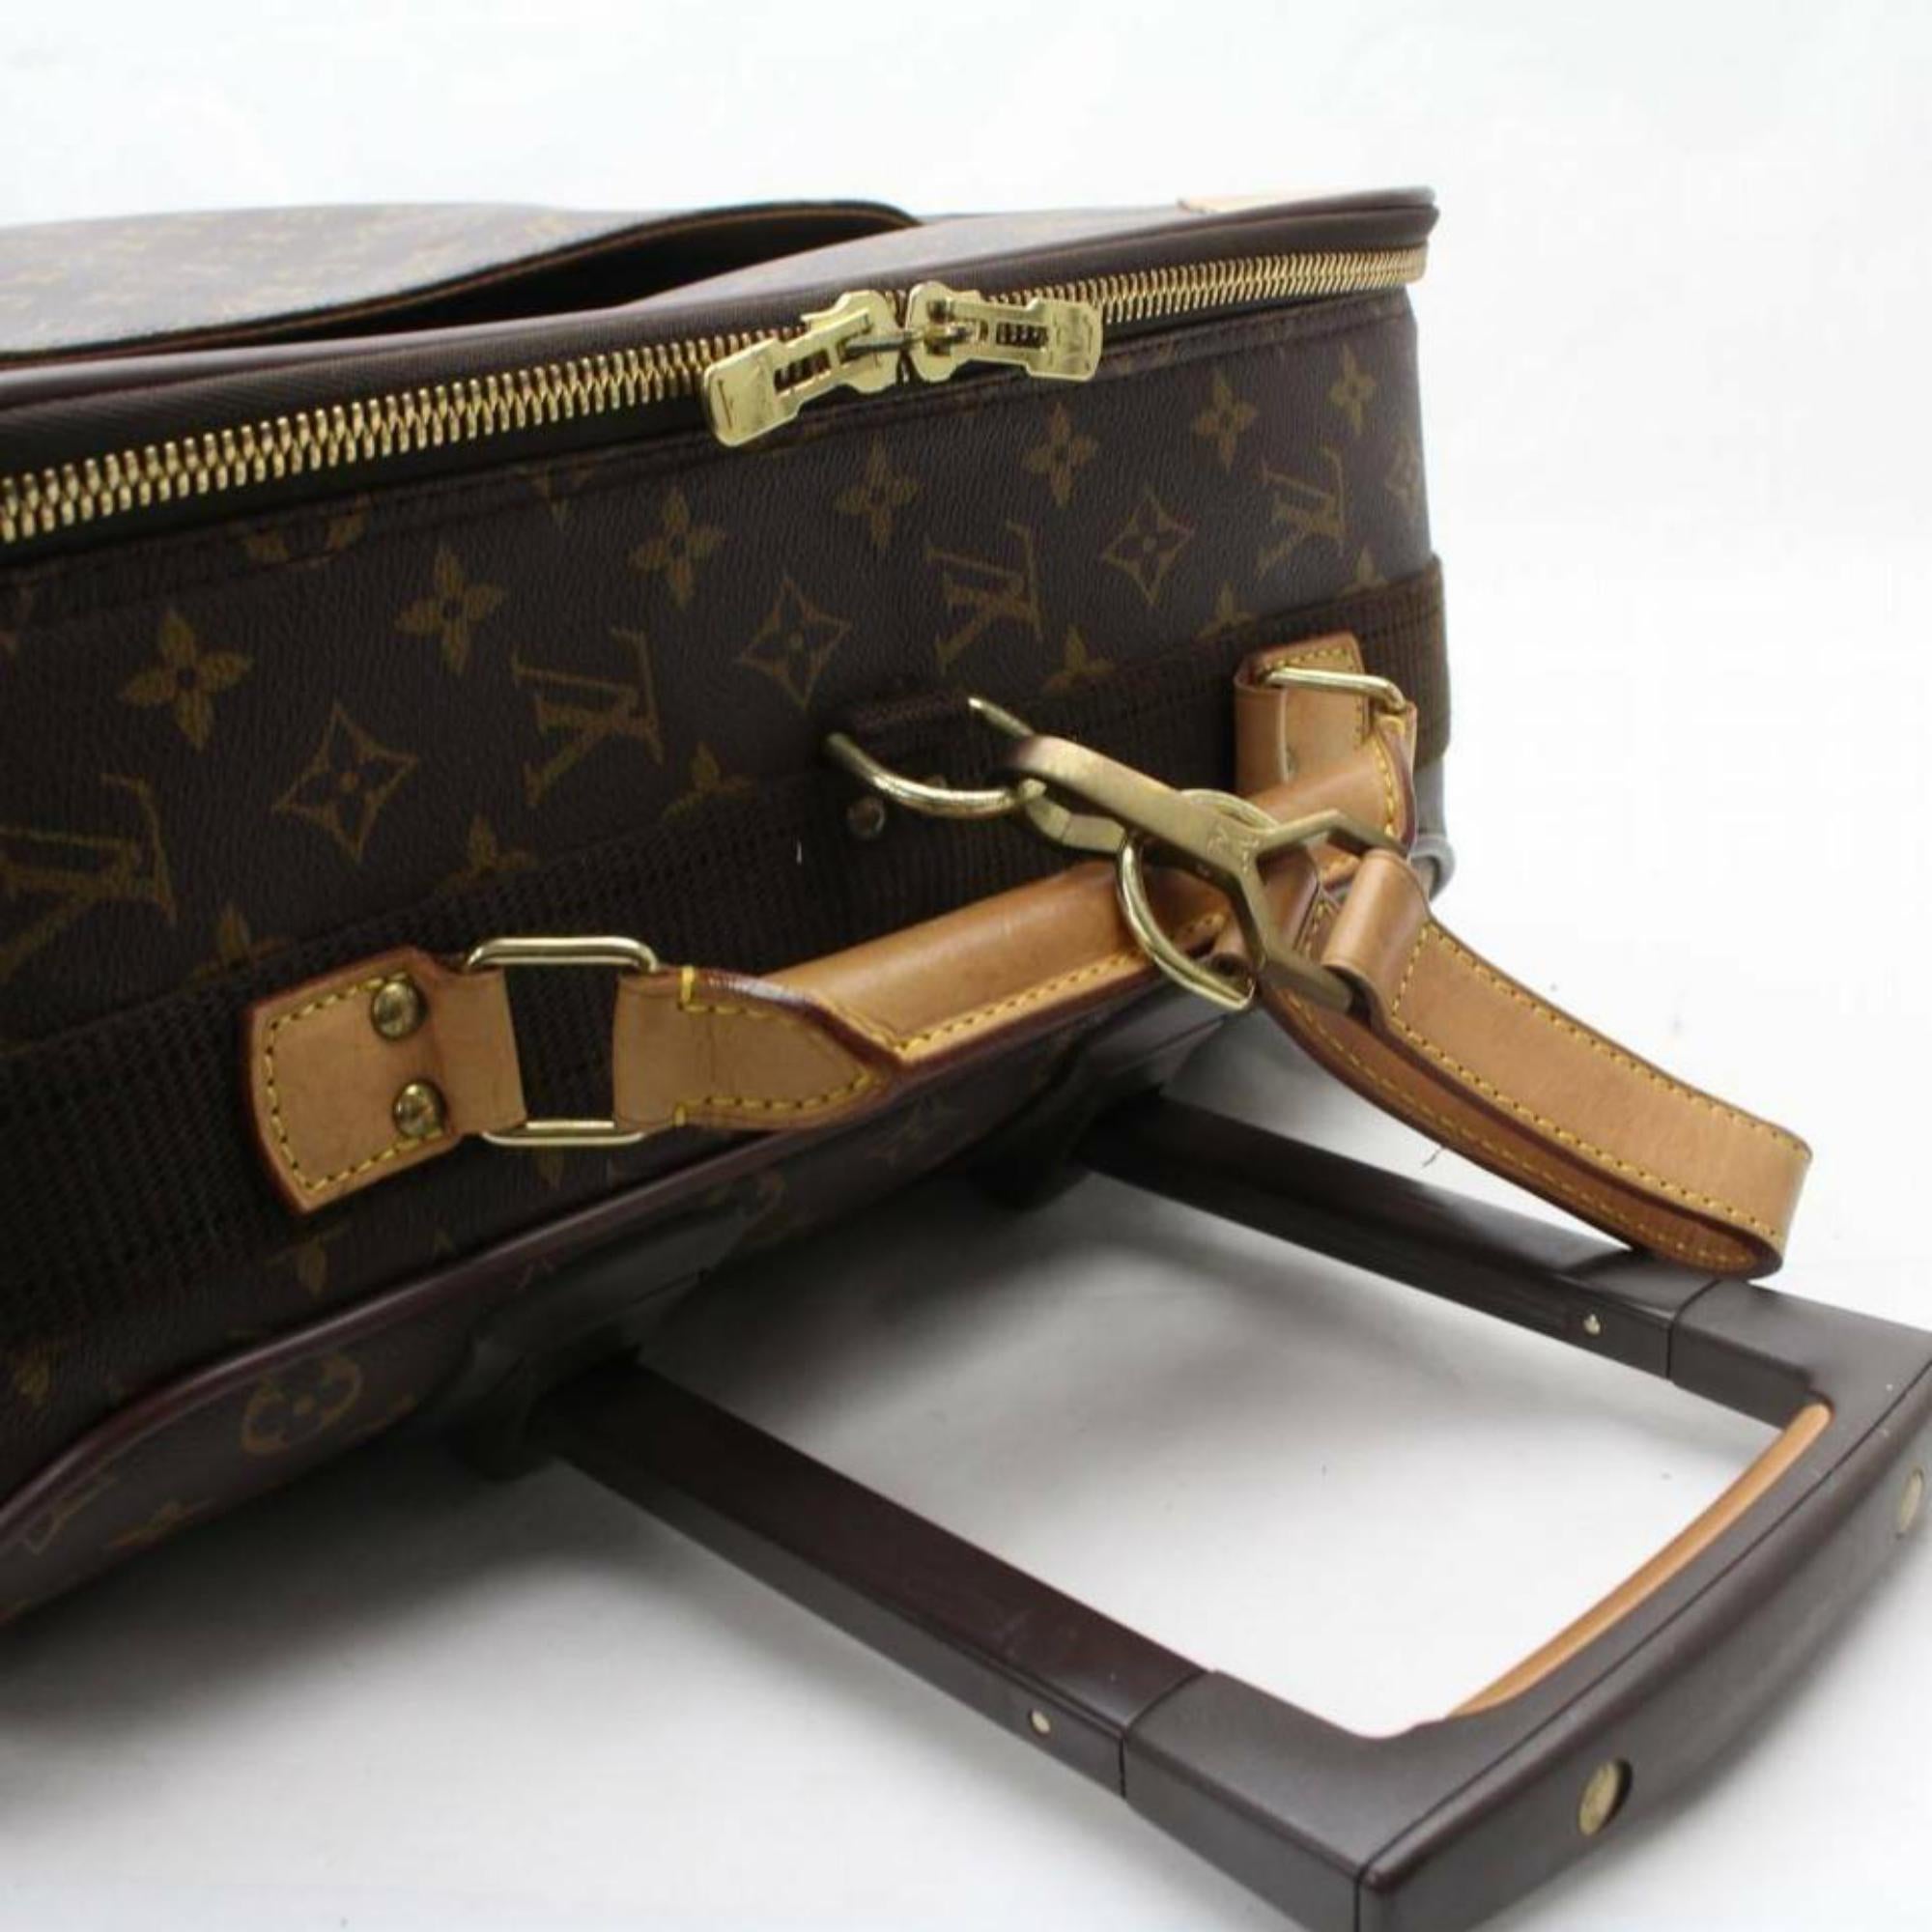 Louis Vuitton Garment Cover Rolling Luggage with 870298 Brown Canvas Travel Bag In Good Condition For Sale In Forest Hills, NY